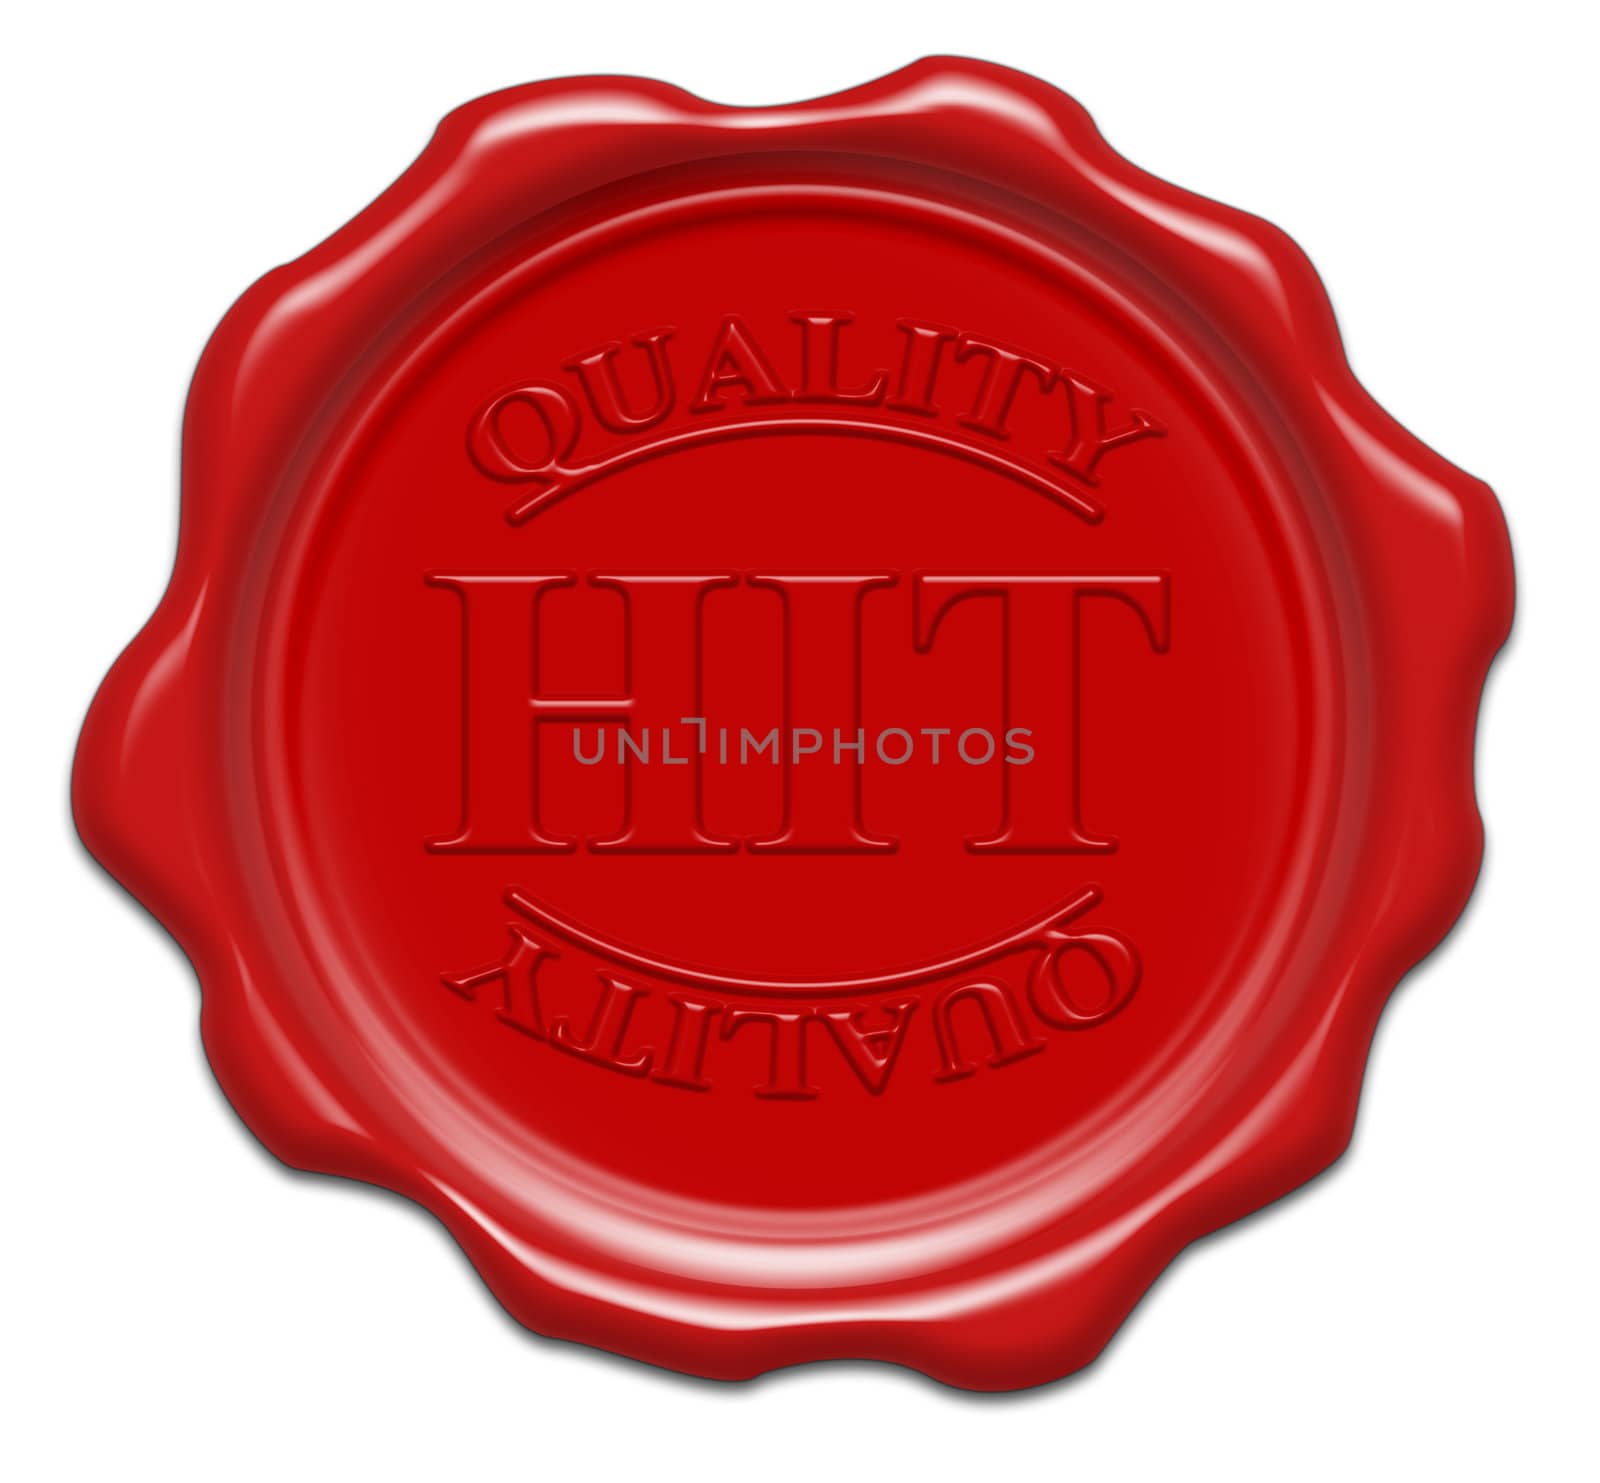 quality hit - illustration red wax seal isolated on white backgr by mozzyb